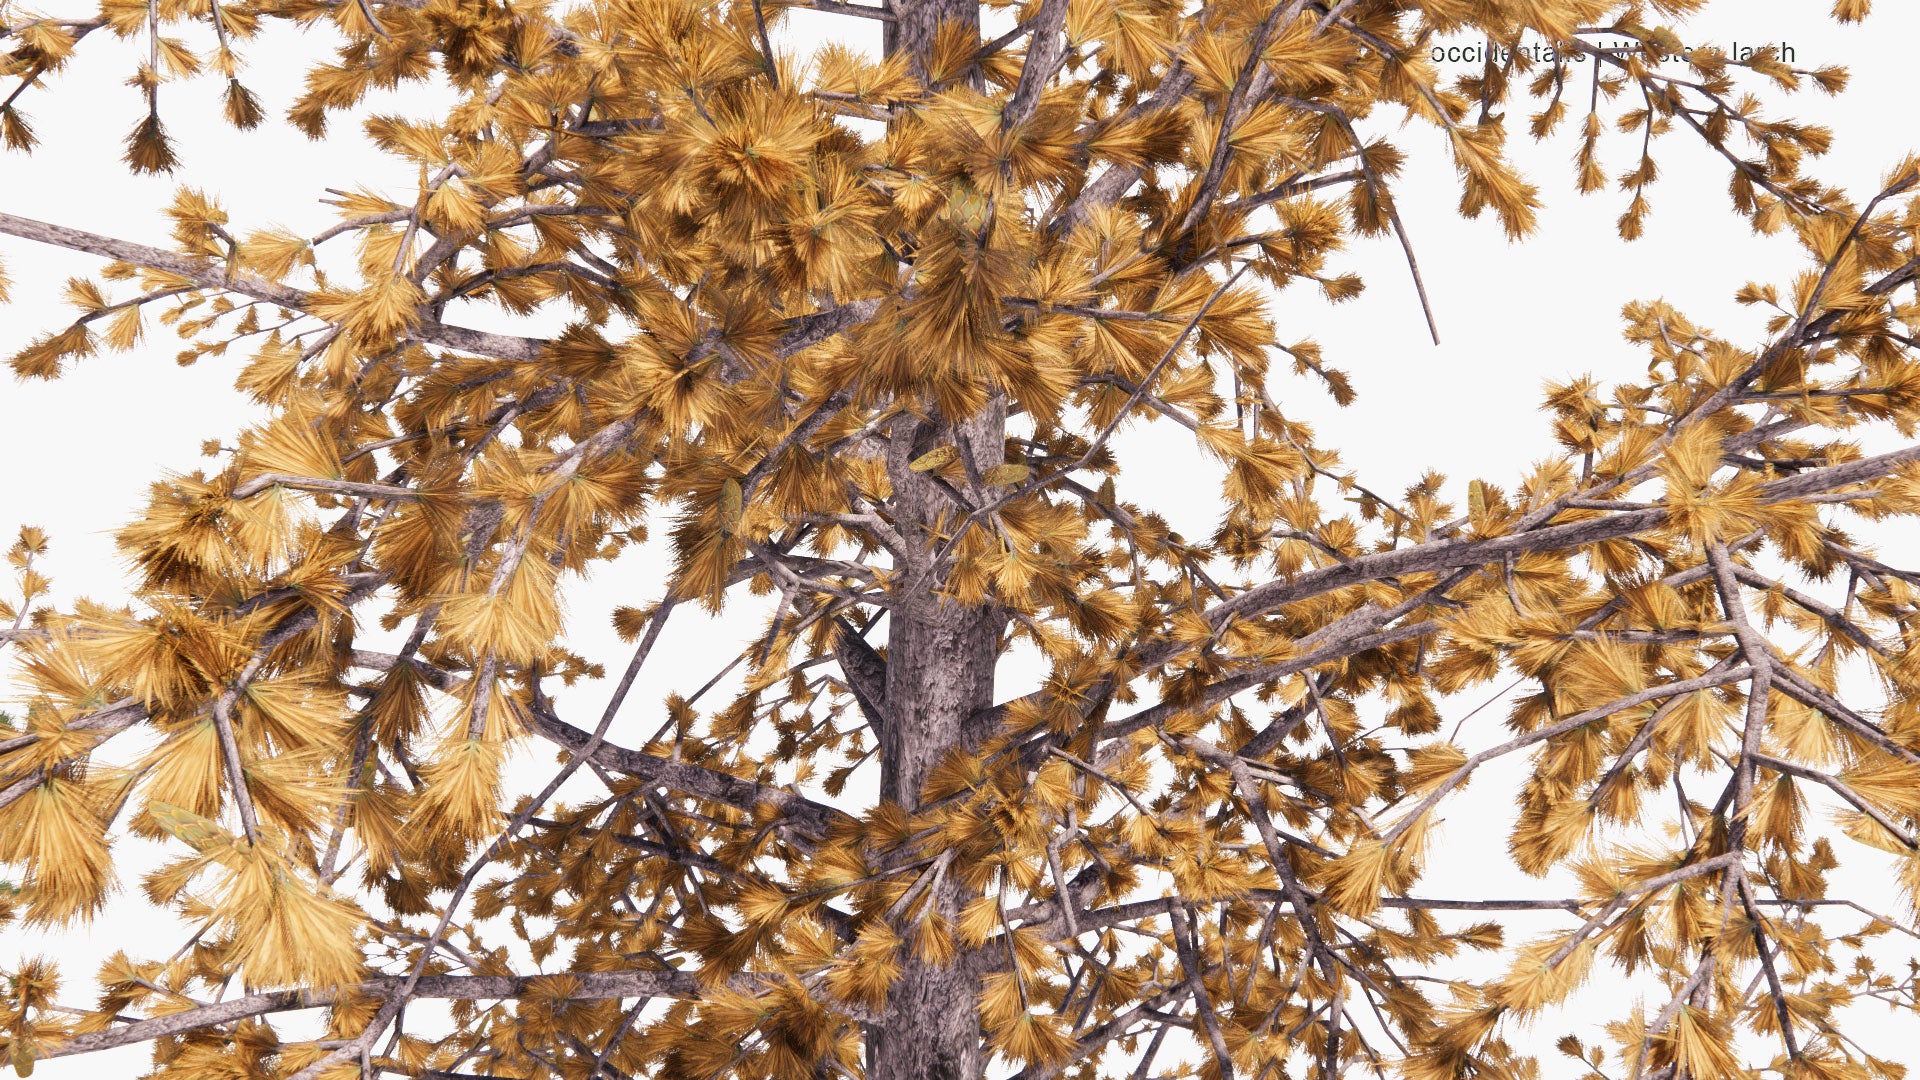 Low Poly Larix Occidentalis - Western Larch (3D Model)